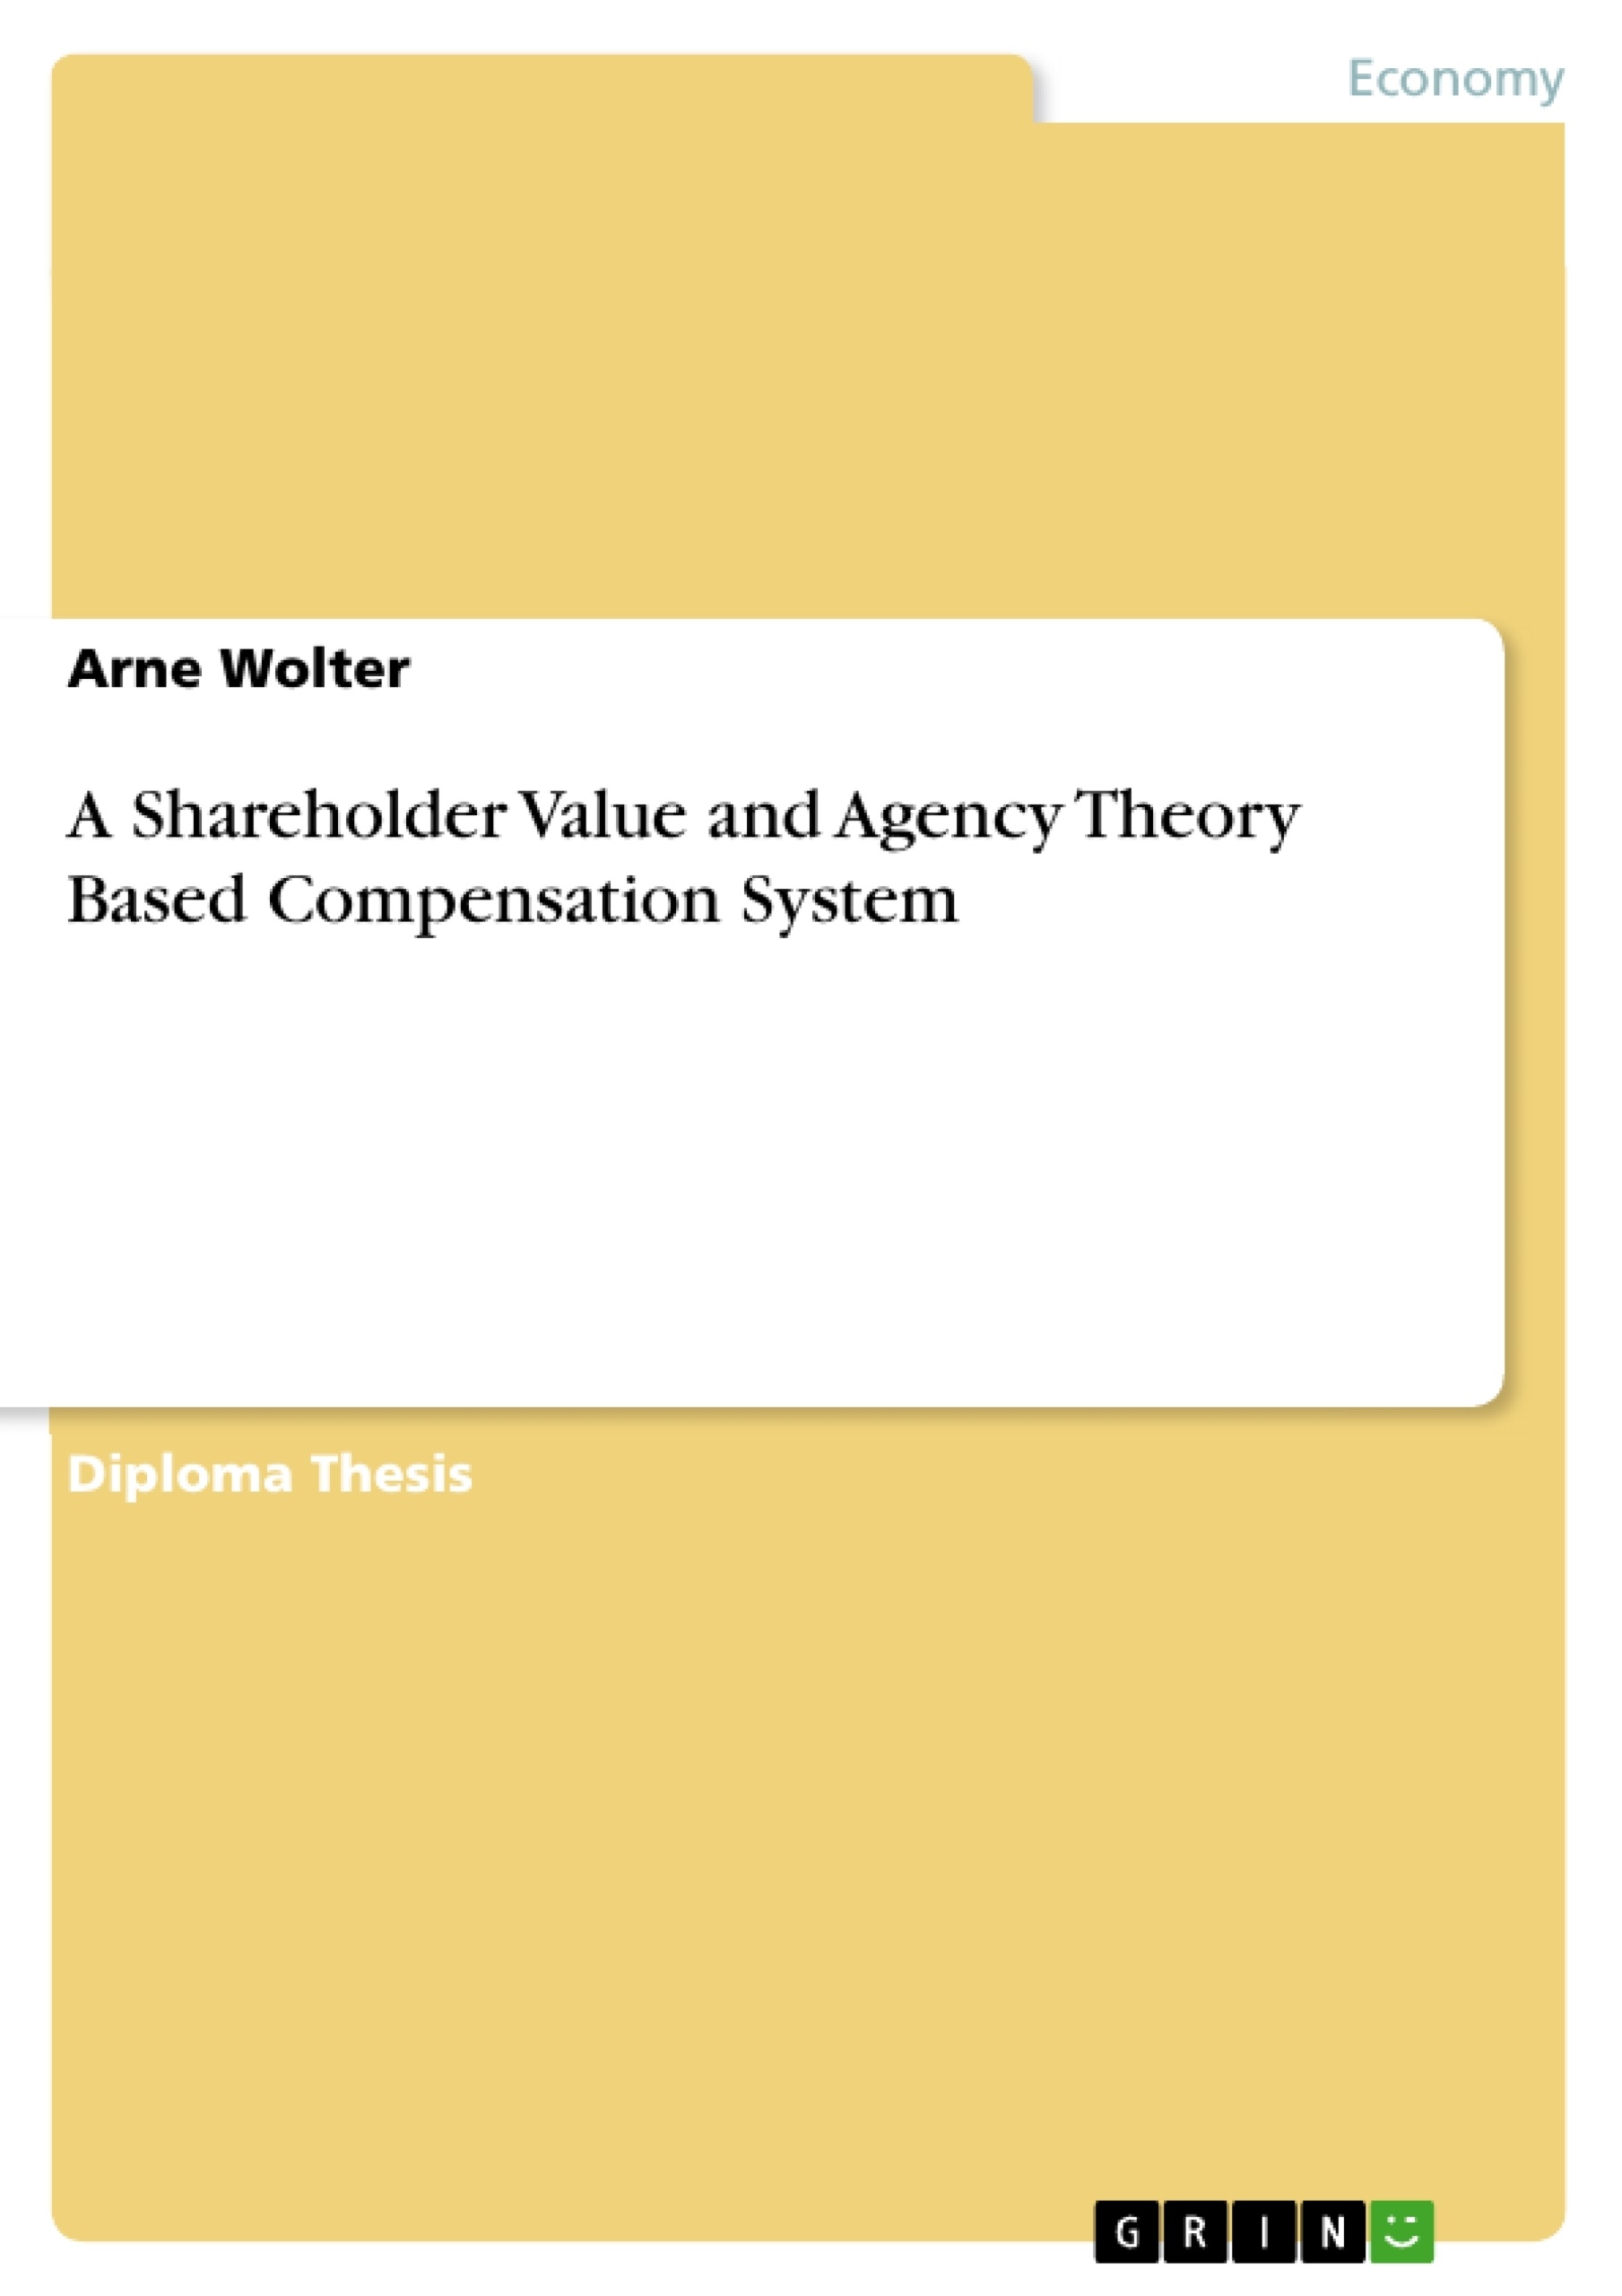 Value based management master thesis